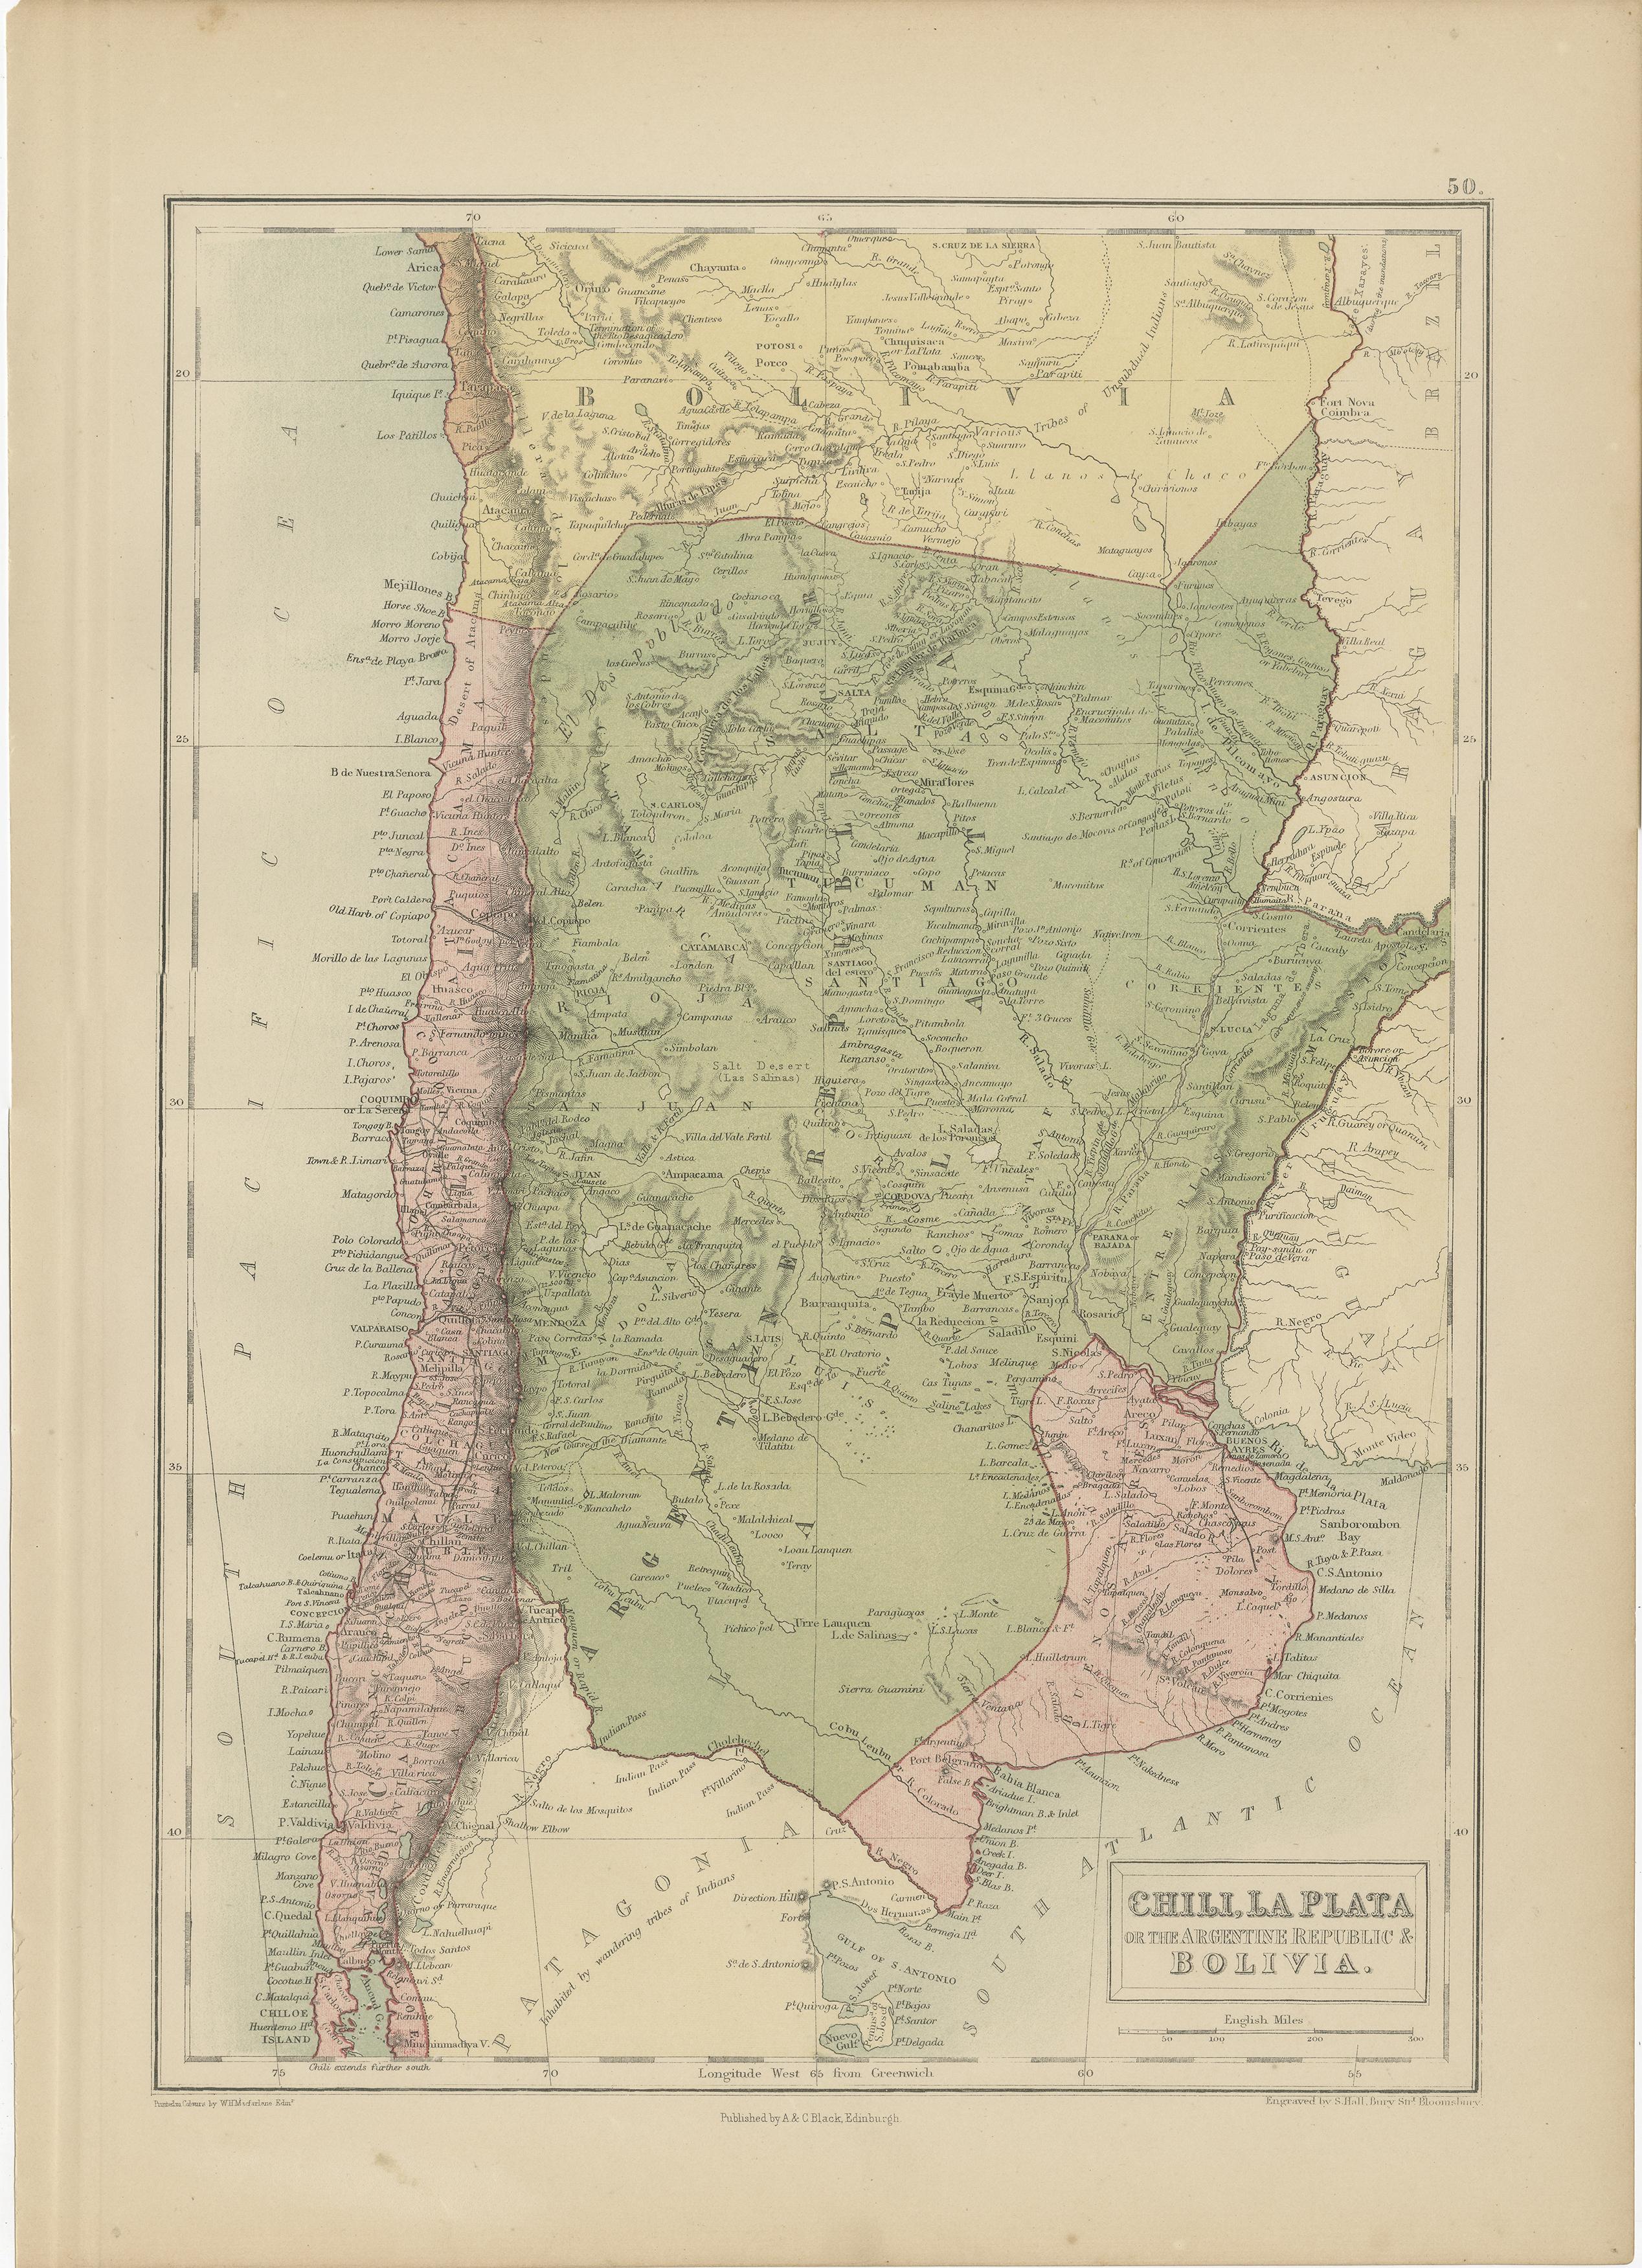 Antique map titled 'Chili, La Plata & Bolivia'. Original antique map of Chile, La Plata and Part of Bolivia. This map originates from ‘Black's General Atlas of The World’. Published by A & C. Black, 1870.